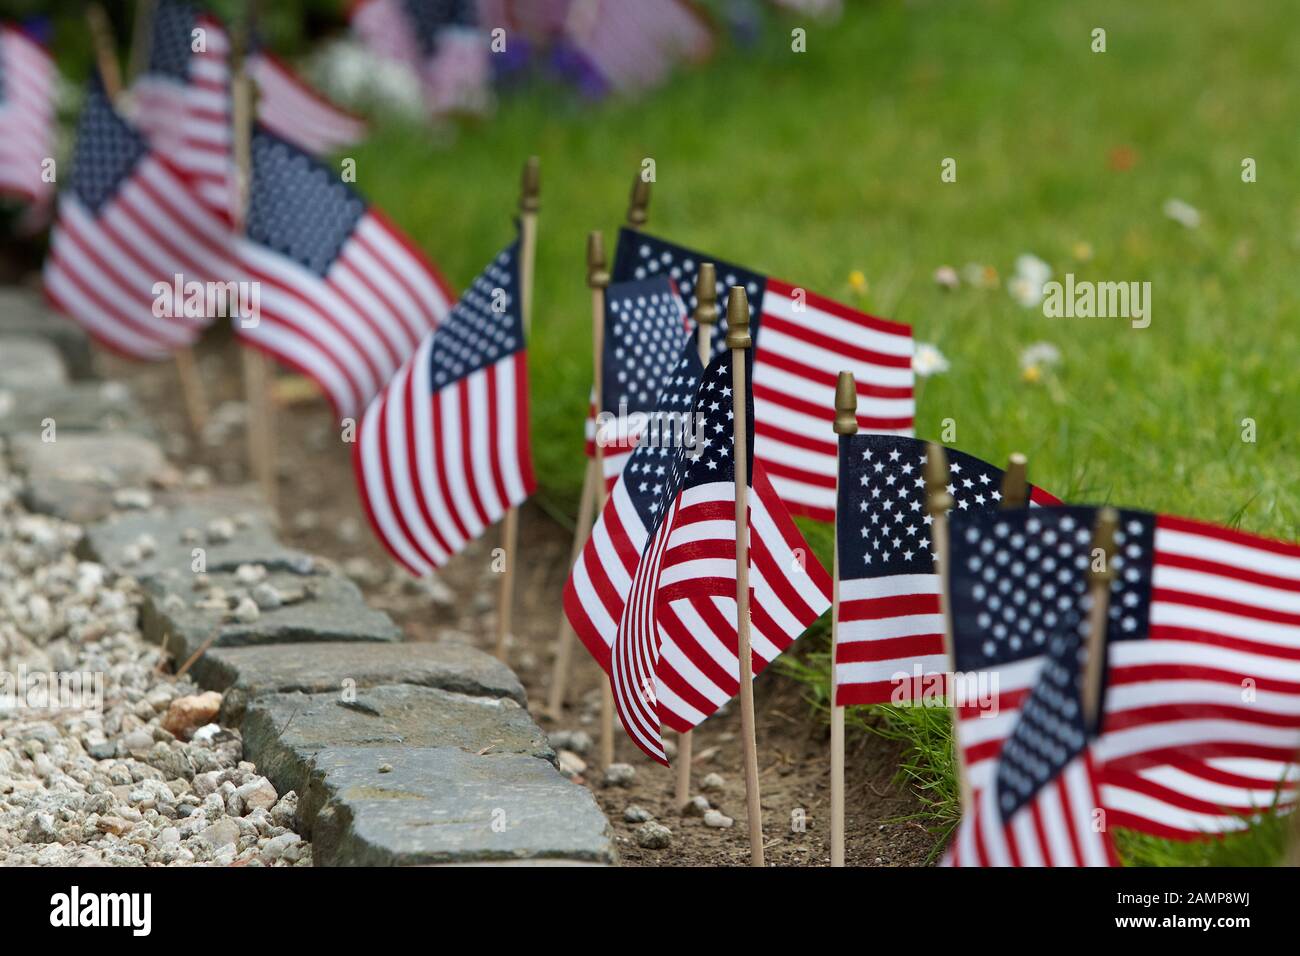 Miniature American flags decorate a garden on the 4th of July. Stock Photo